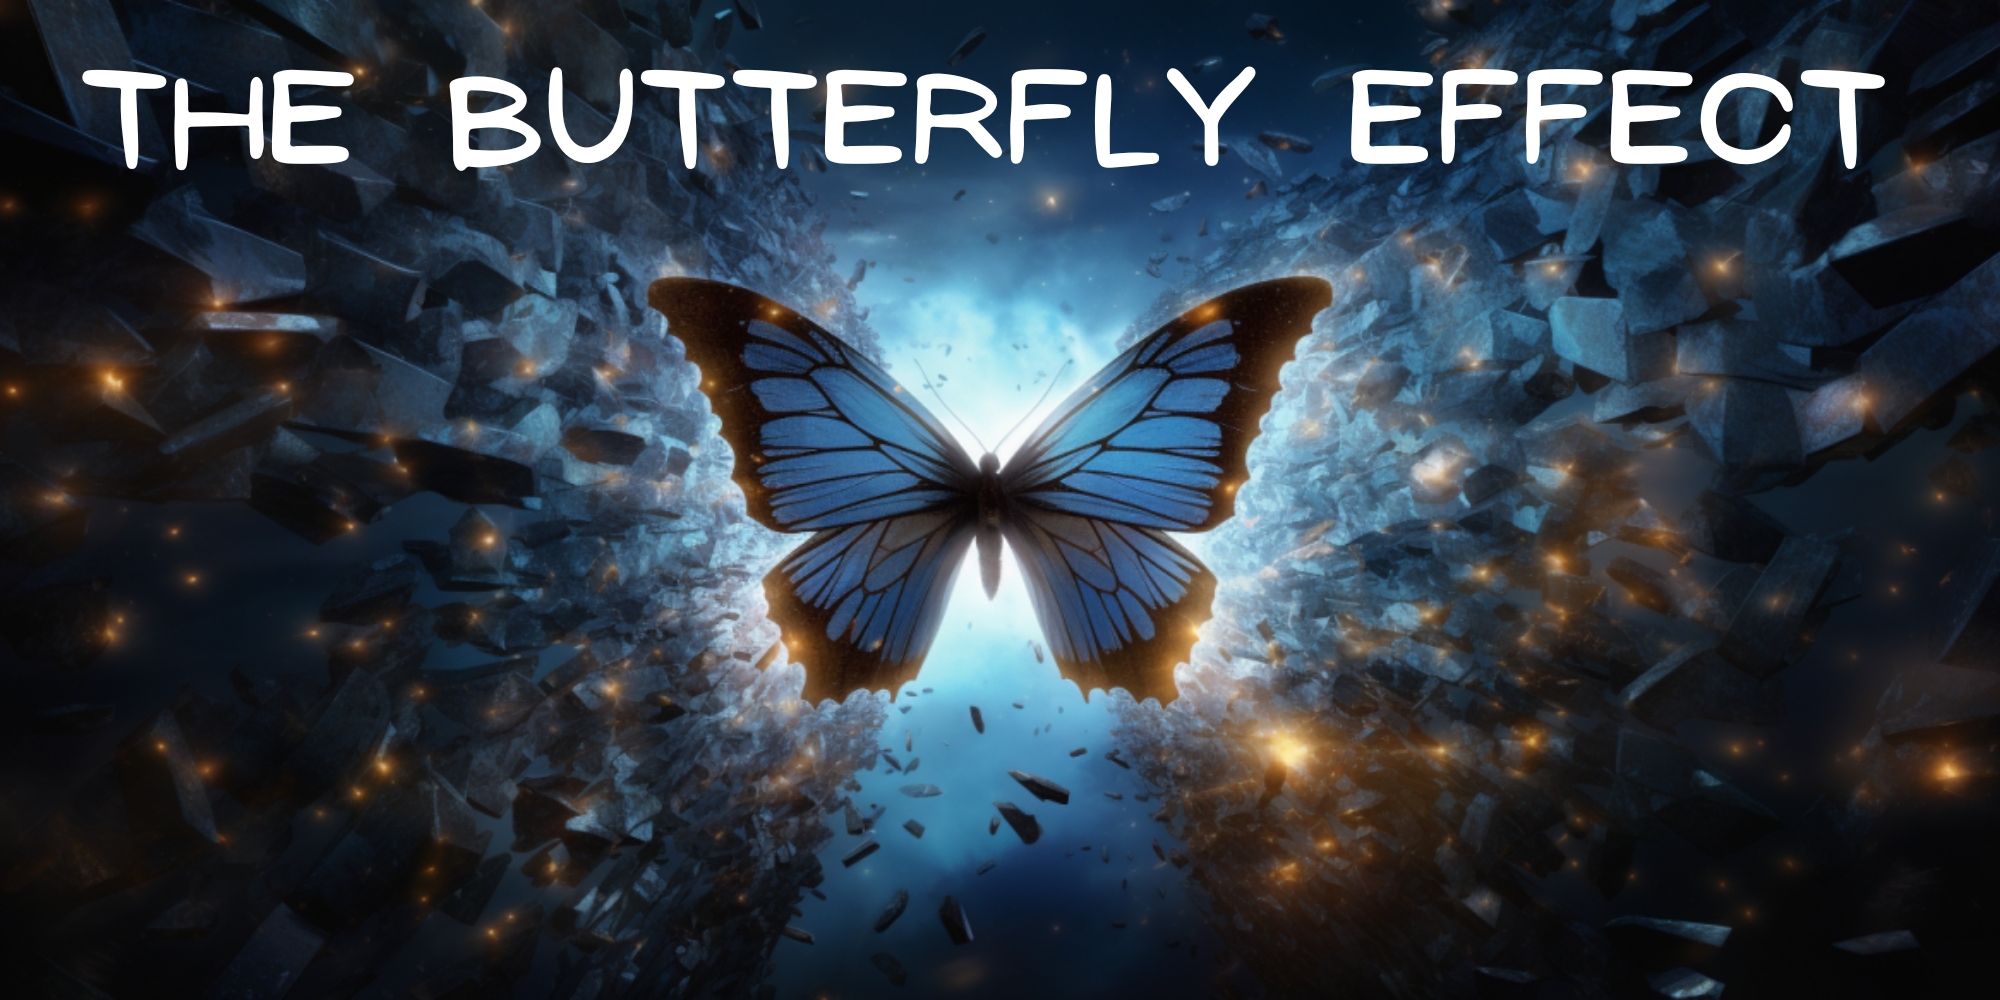 The Butterfly Effect: Your Small Actions Can Change the World